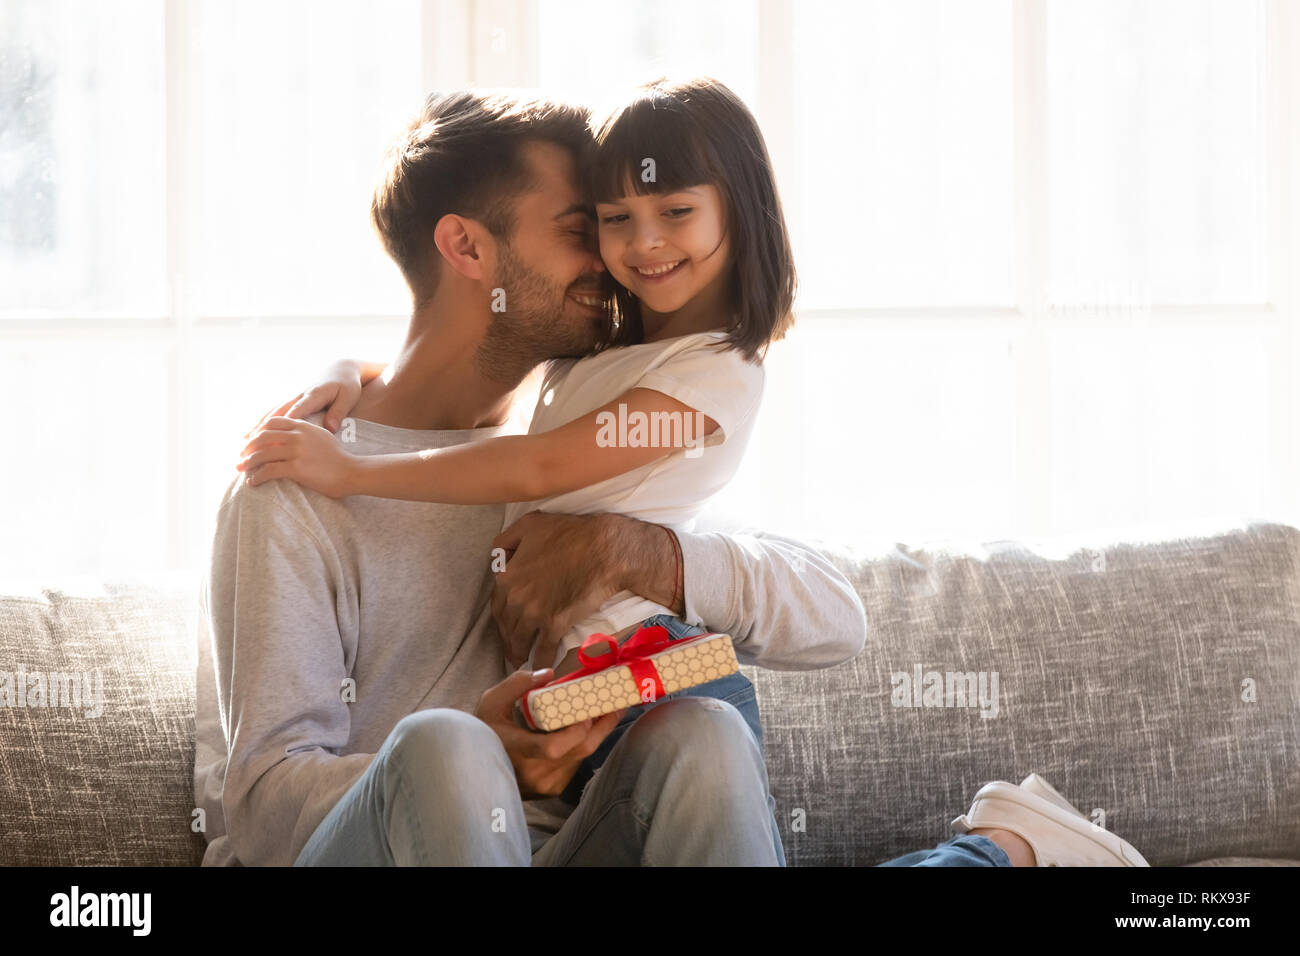 Grateful dad hugging daughter thanking for gift on fathers day Stock Photo 